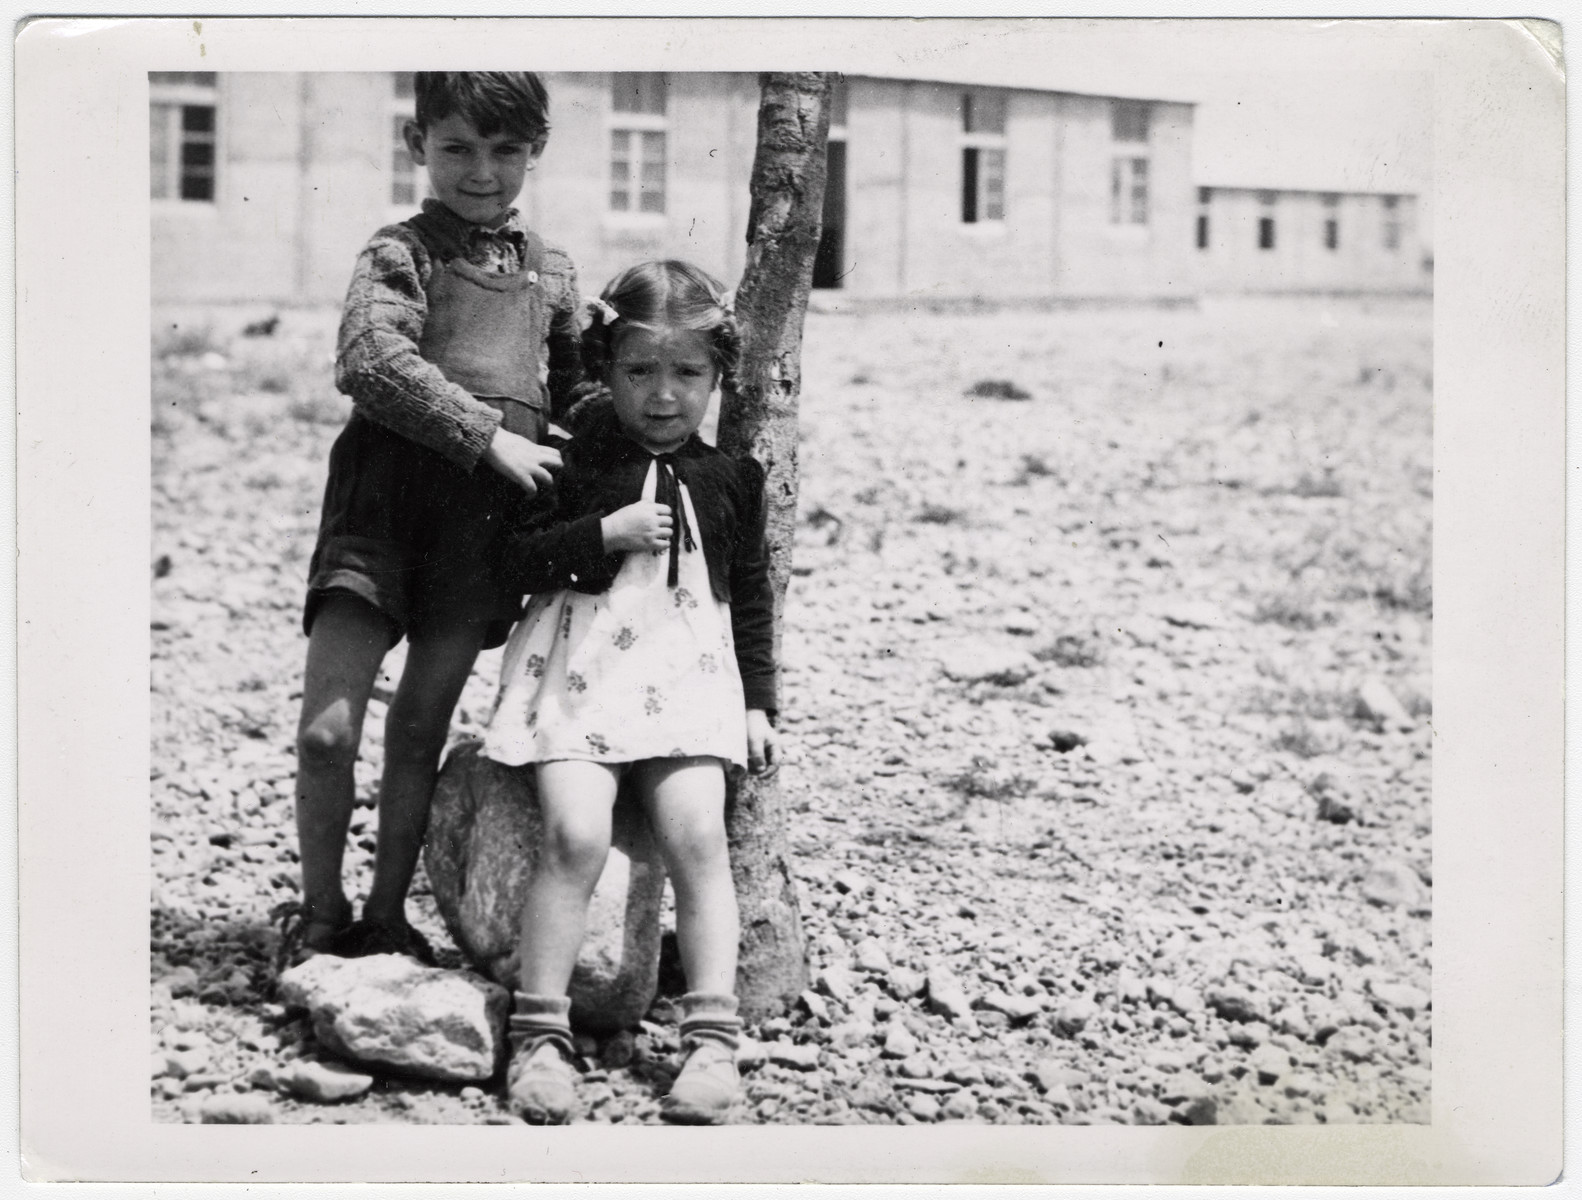 A Spanish boy and girl stand outside next to a tree, in front of a school building at Rivesaltes. 

Original caption reads: "Two Spaniards of the nursery school."